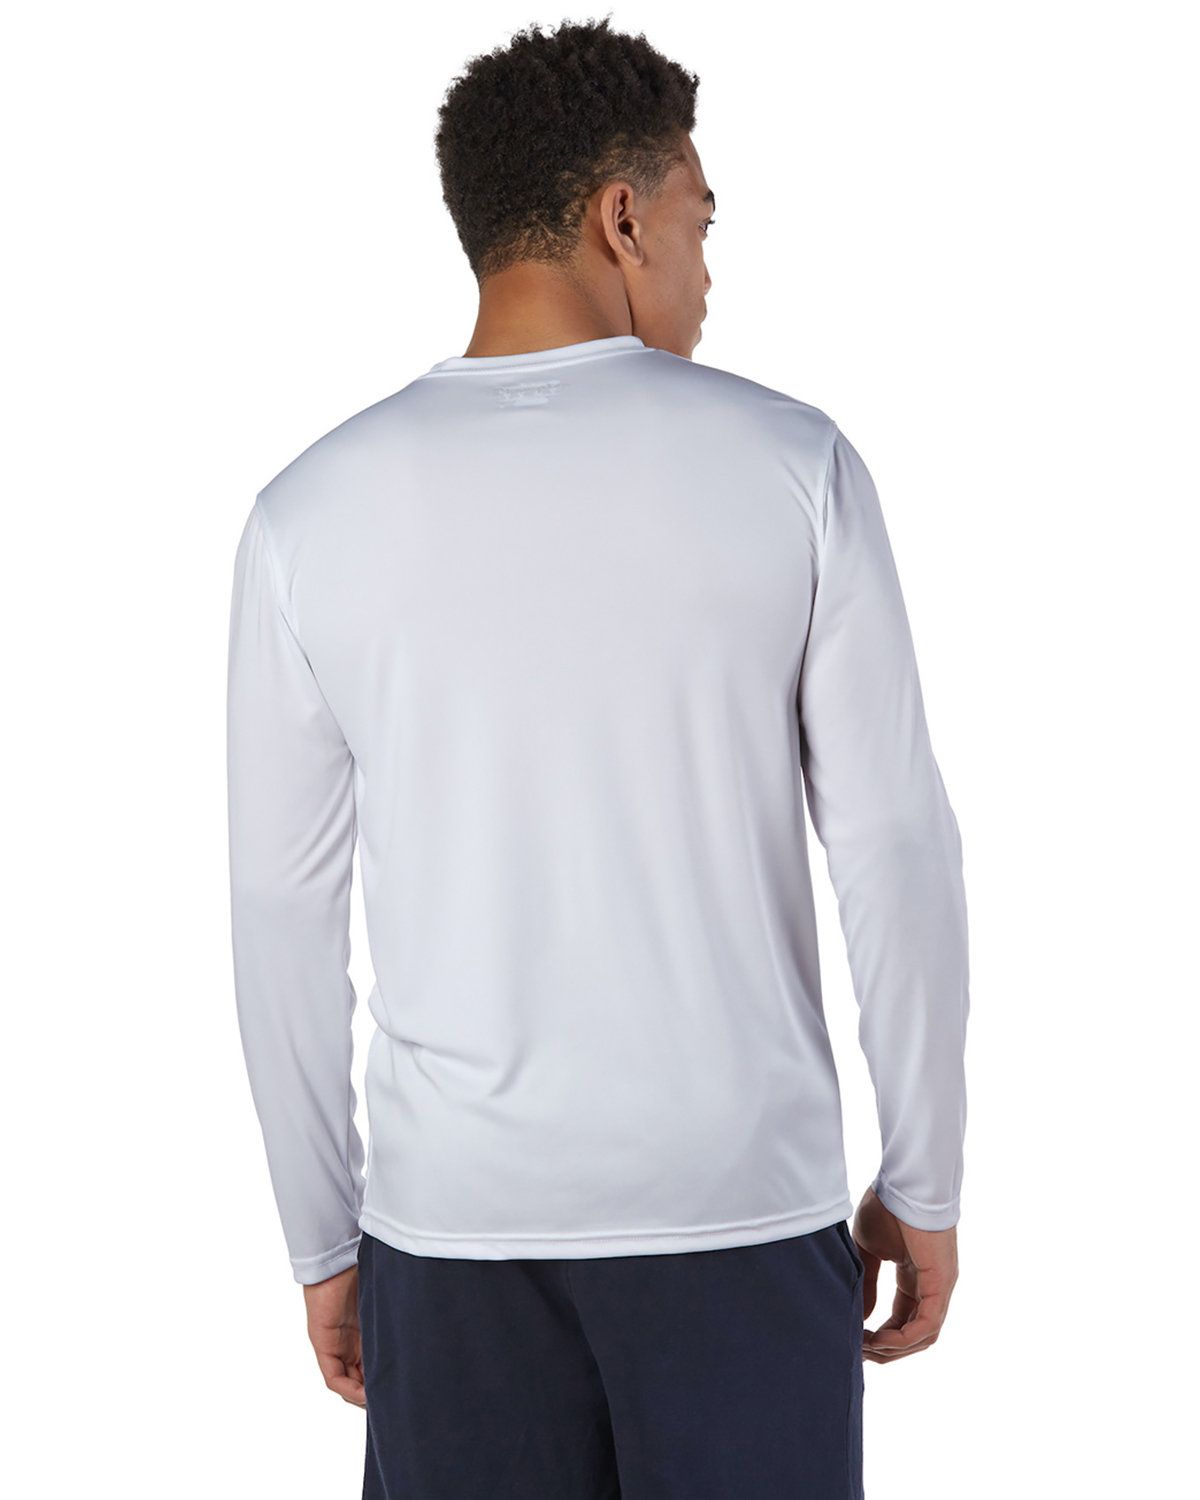 Champion Double Dry Performance Long Sleeve T Shirt Mens Tee S-3XL CW26 